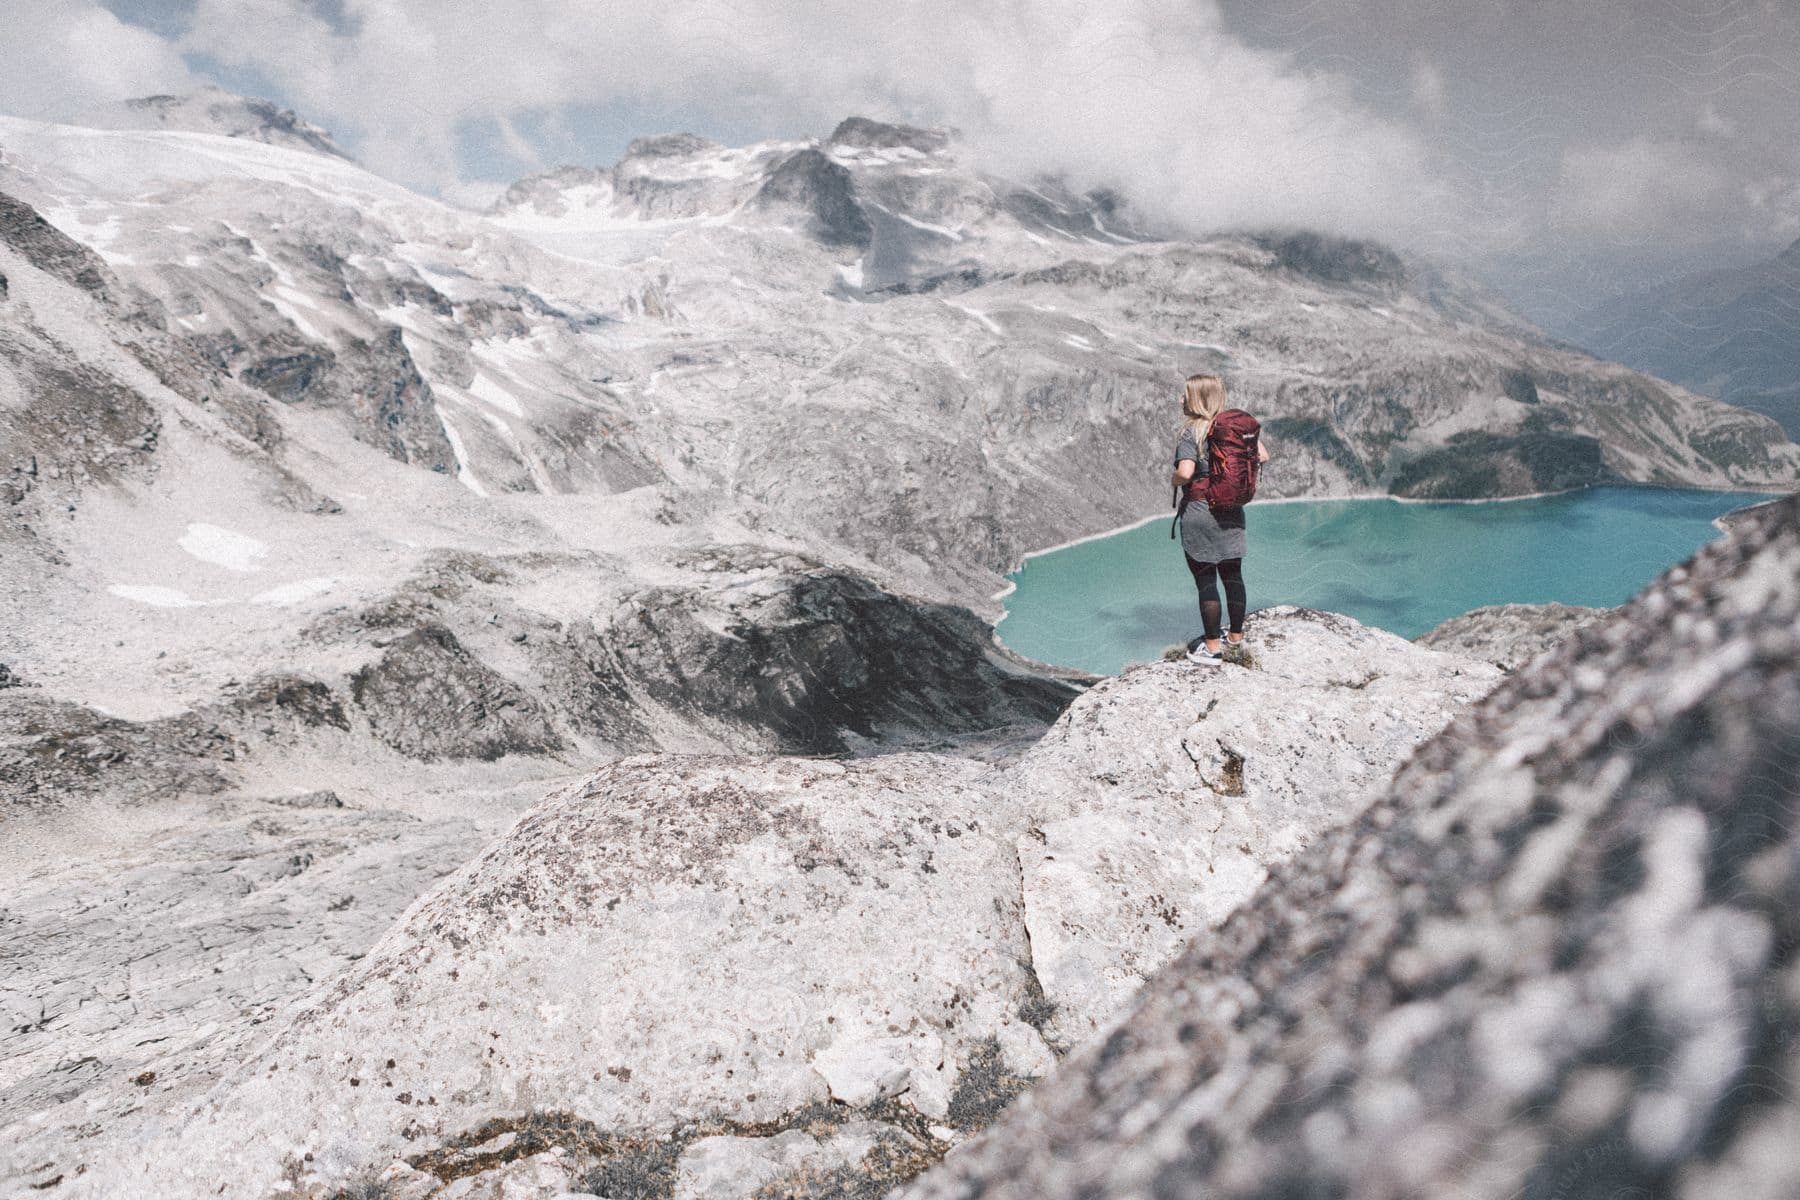 A female hiker stands on rocks overlooking a lake in the alps